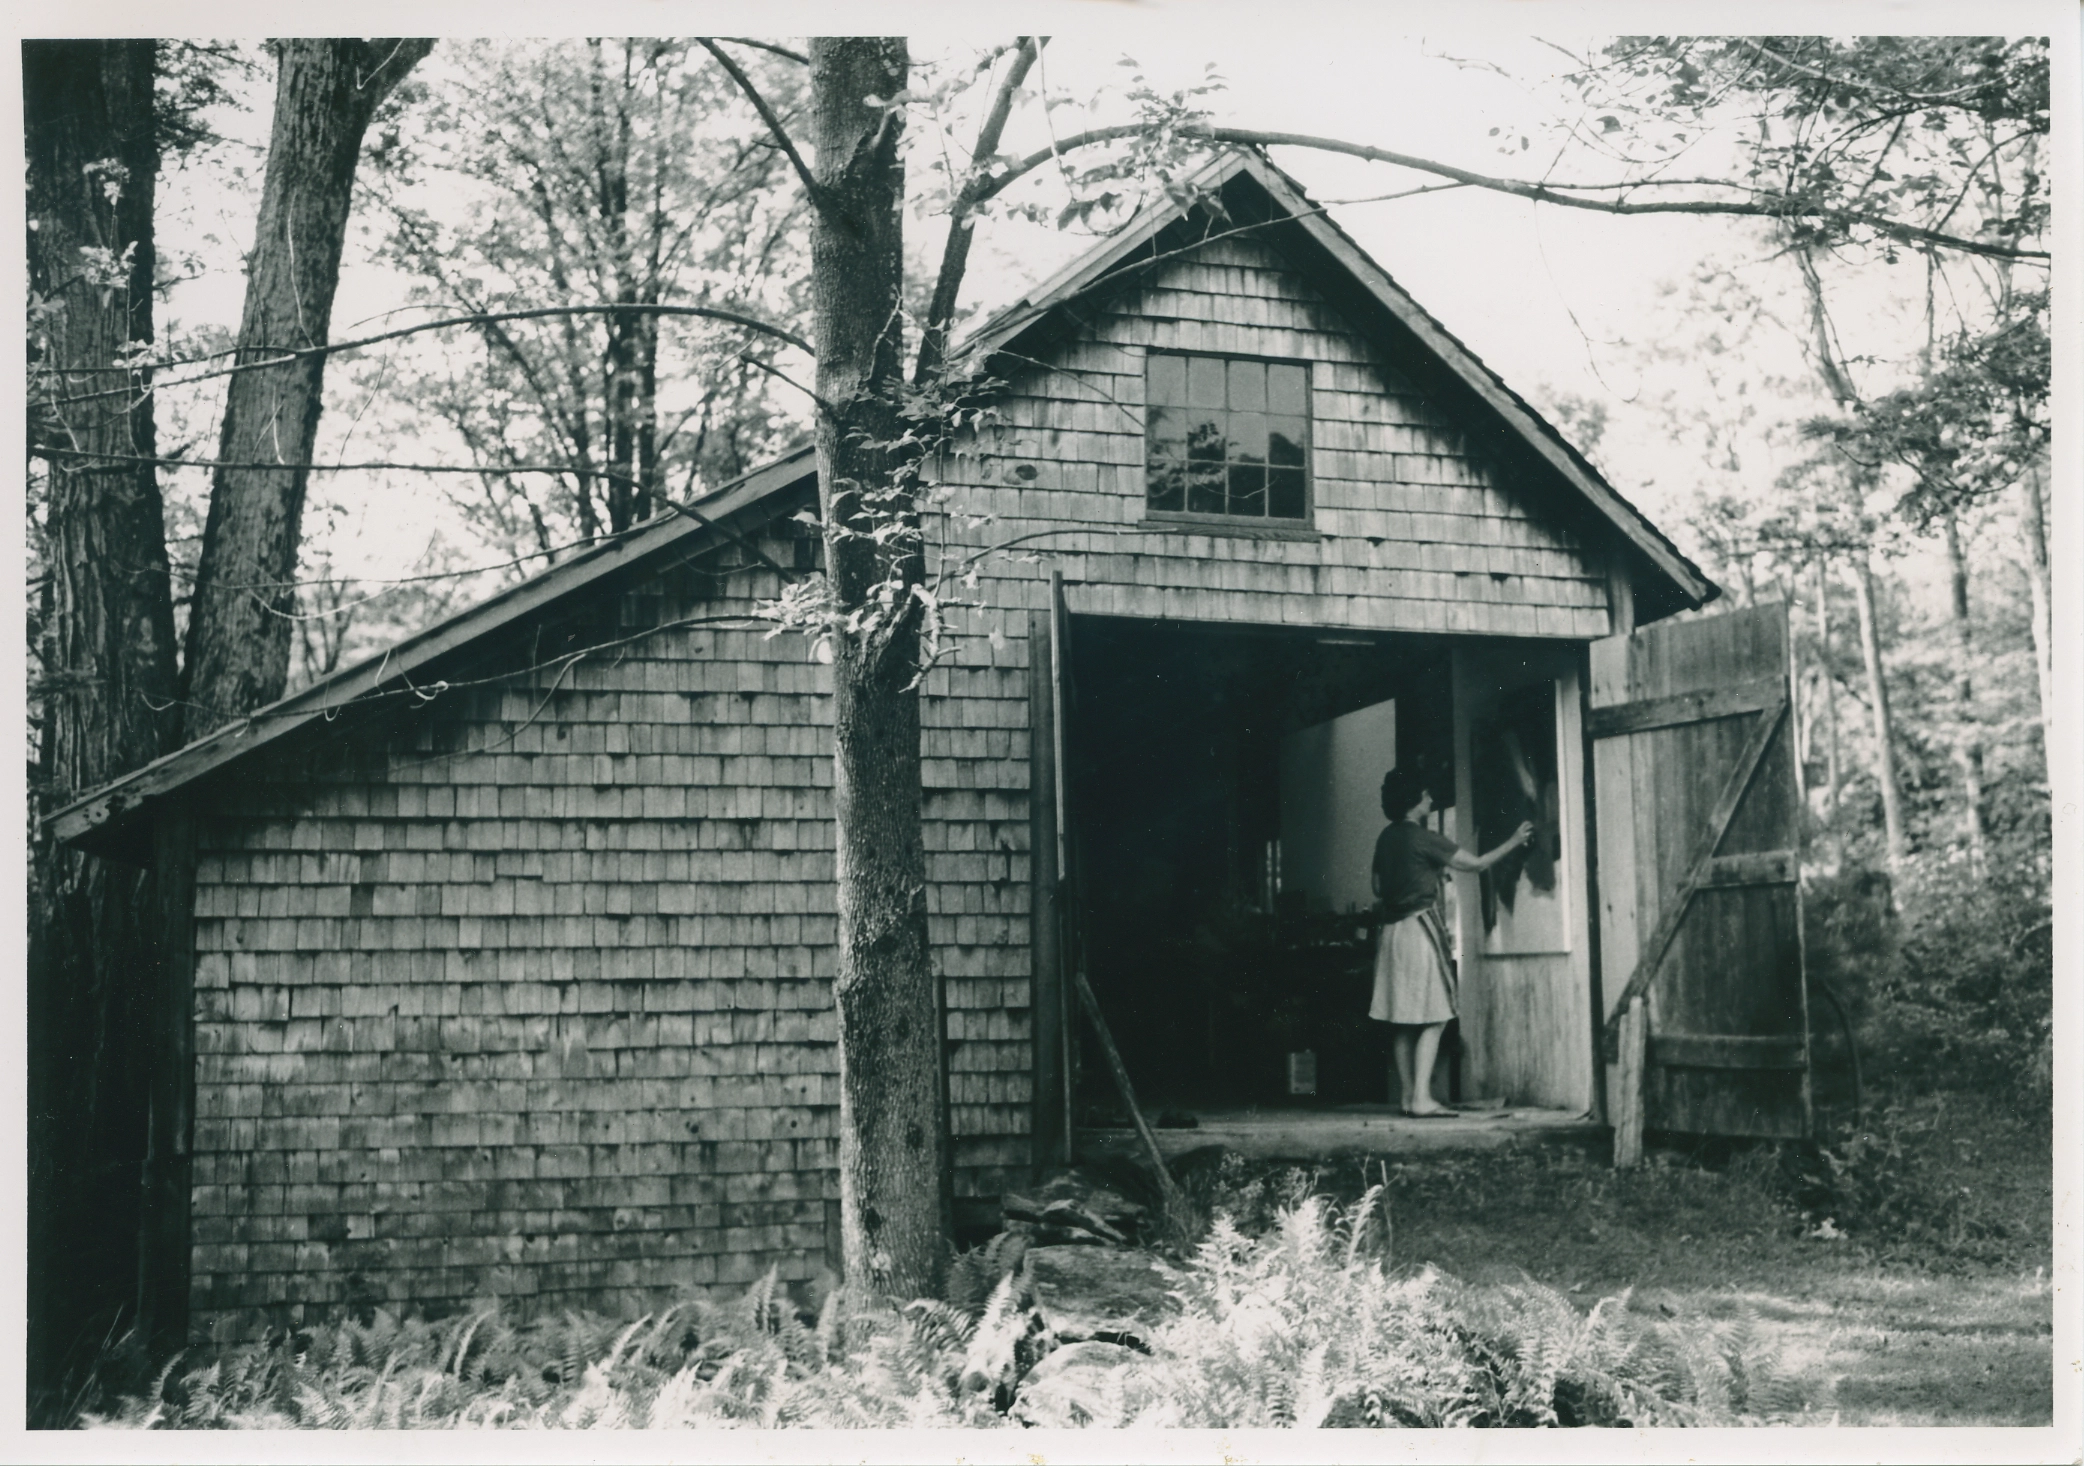 A black and white photograph of a barn in the woods with an open front door; the open door reveals a woman with a light skin tone painting an abstract painting on the wall.